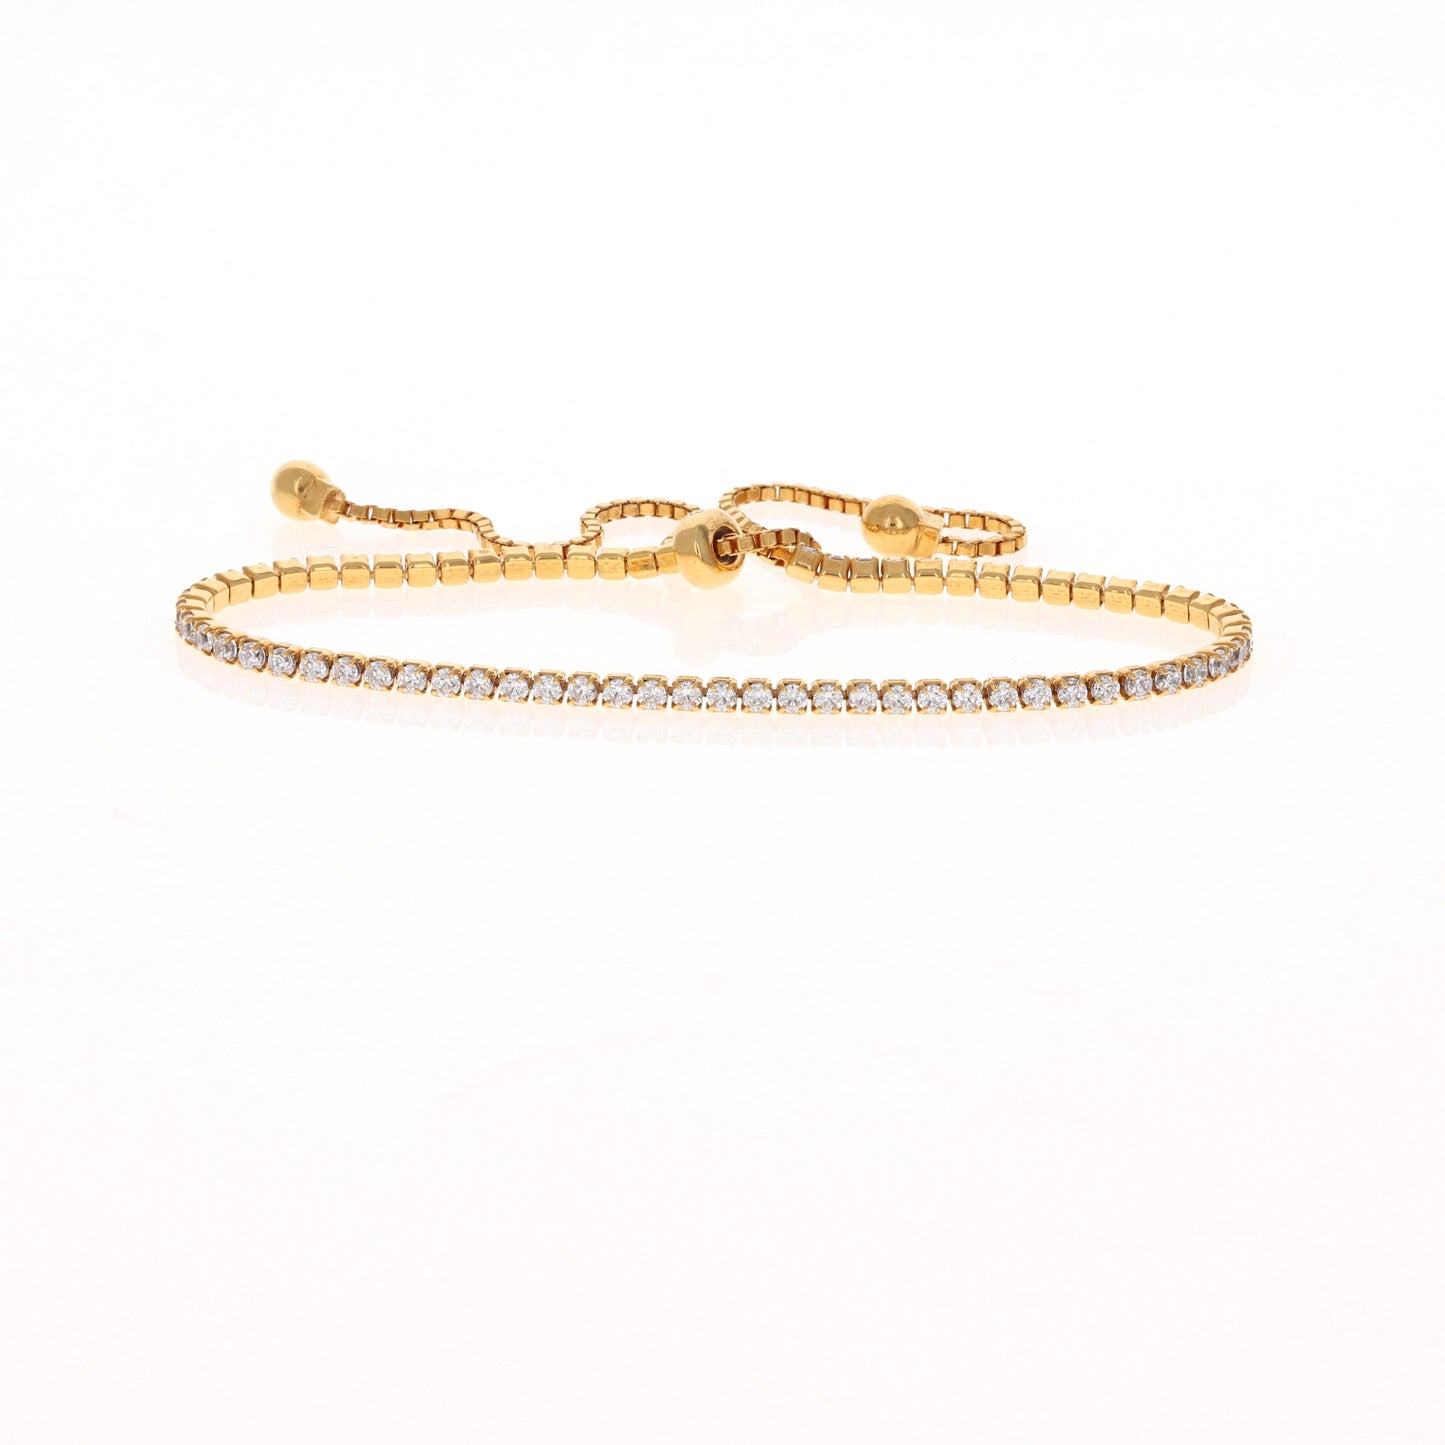 Adjustable Pull String Gold Plated Sterling Silver CZ Tennis Bracelet - Alexandra Marks Jewelry